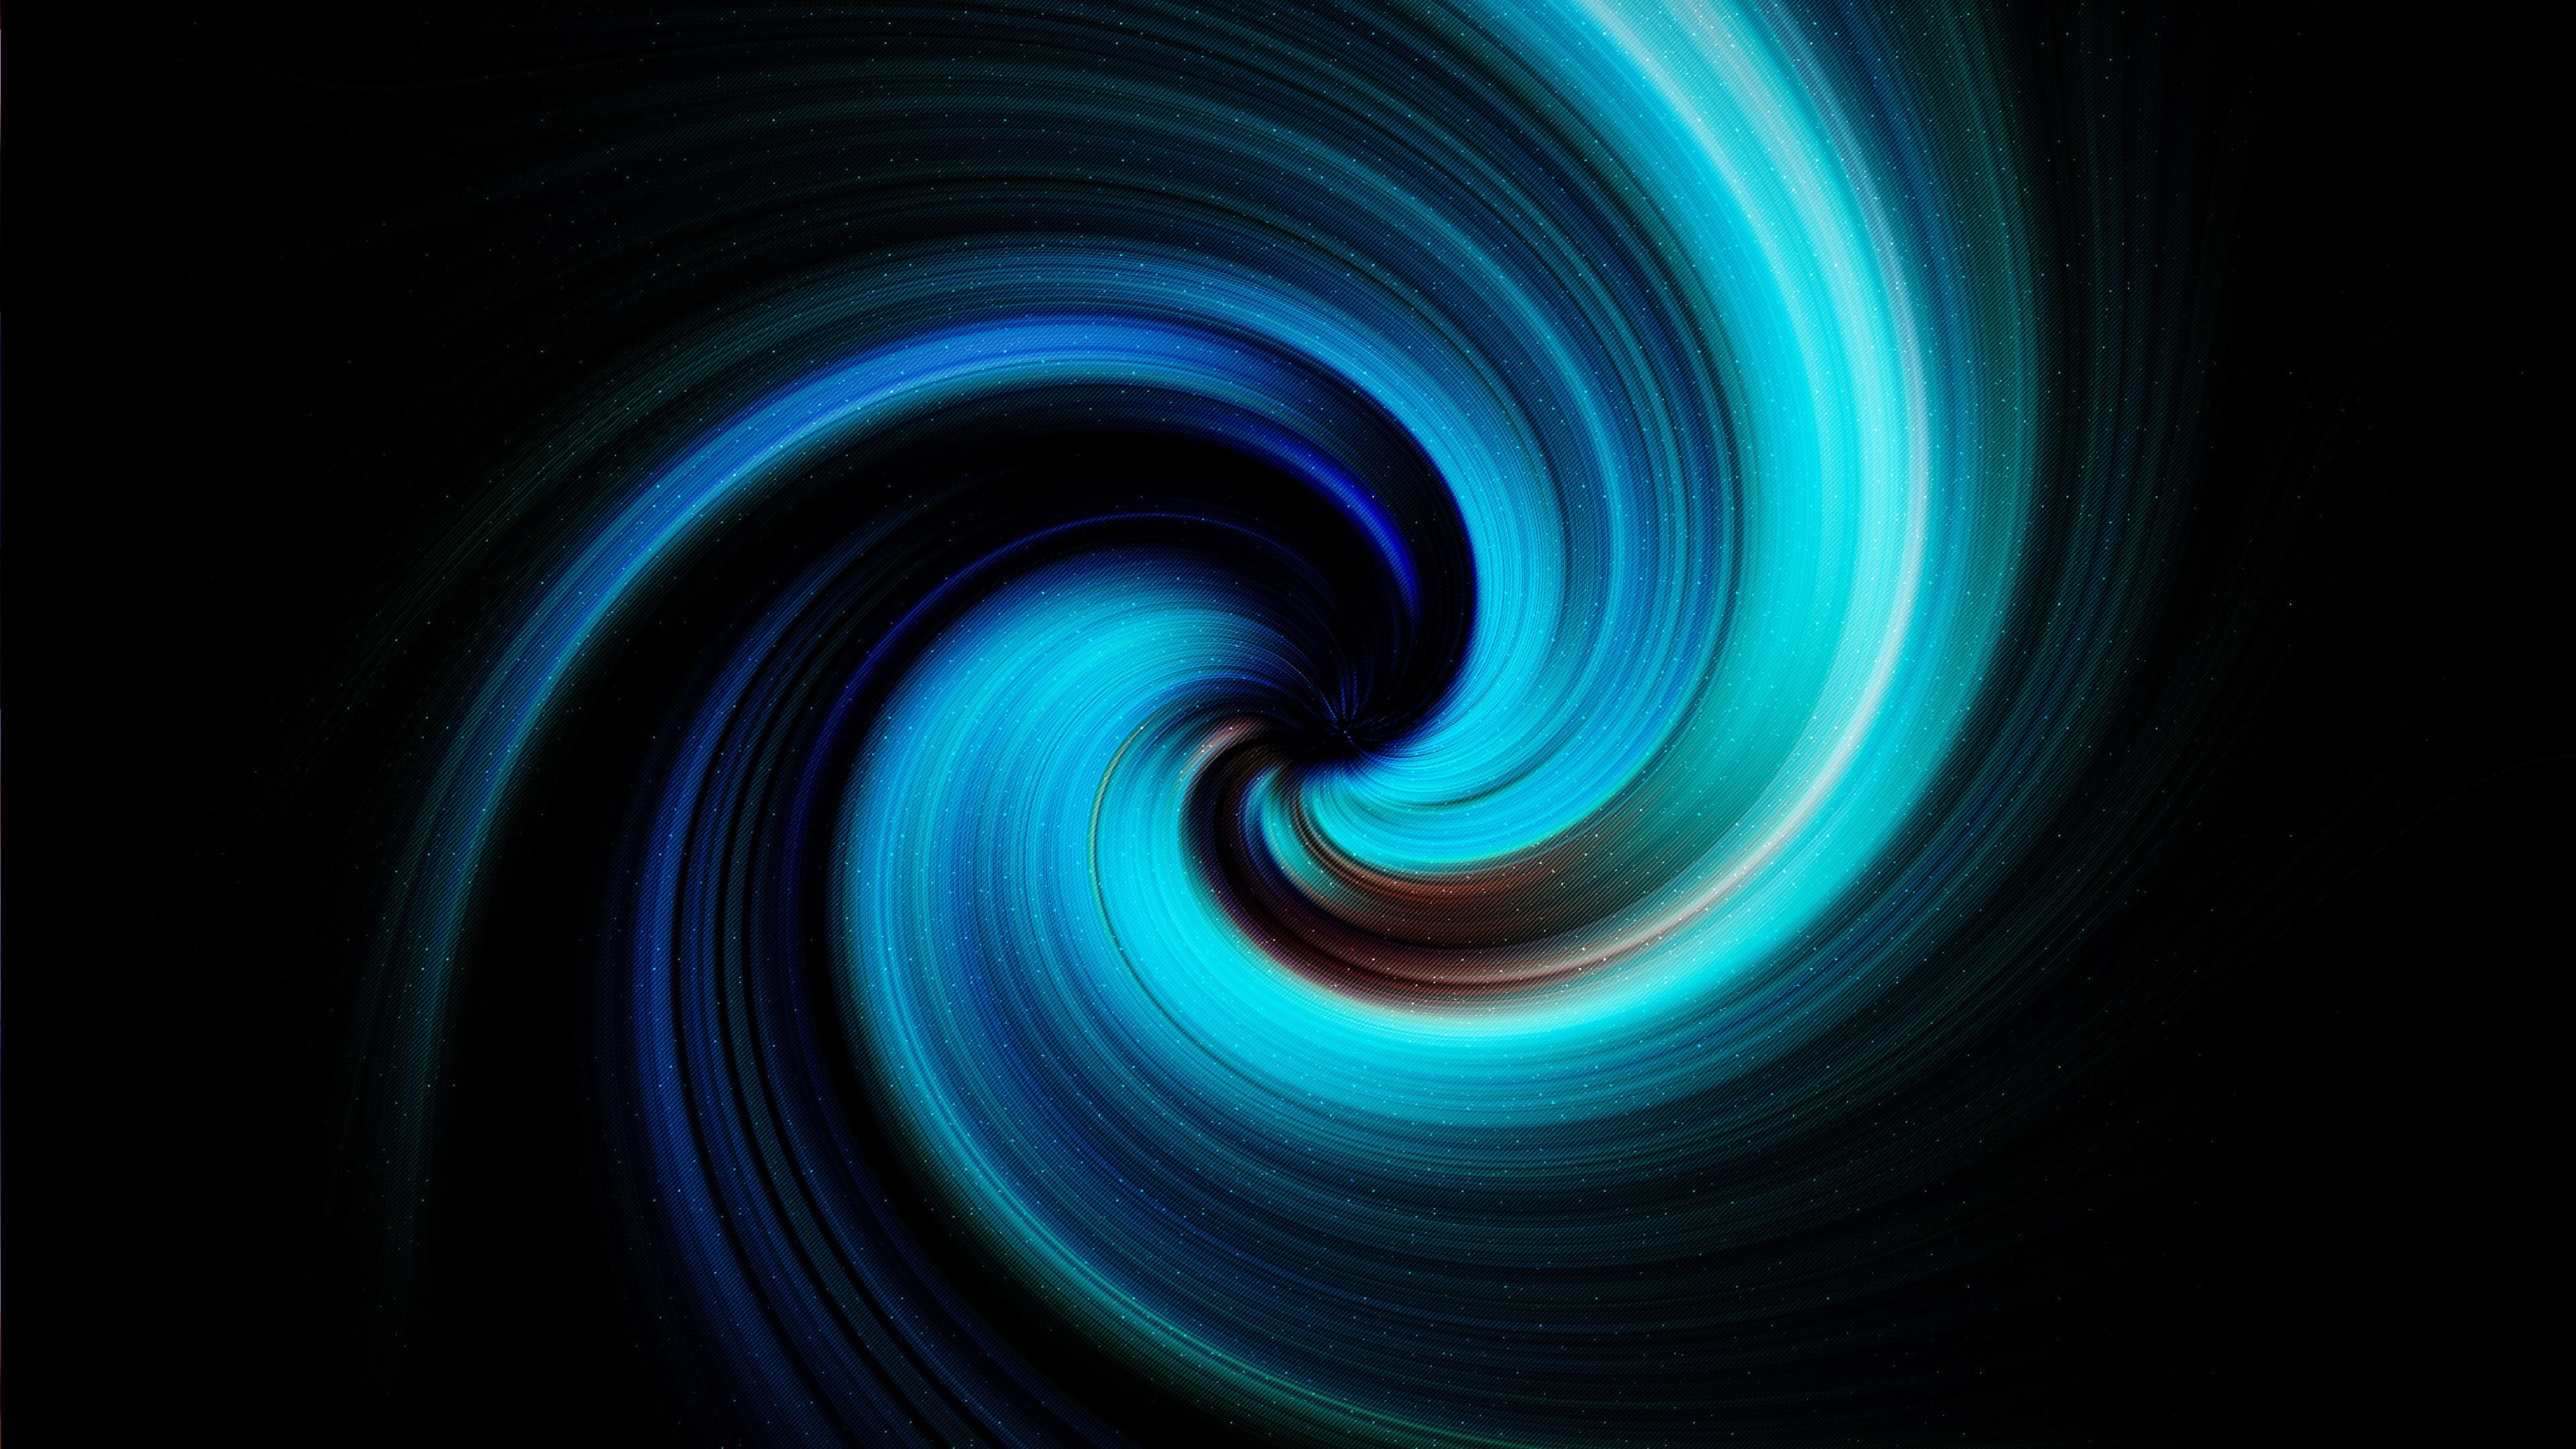 Abstract Spiral Artwork 4k 1440P Resolution HD 4k Wallpaper, Image, Background, Photo and Picture